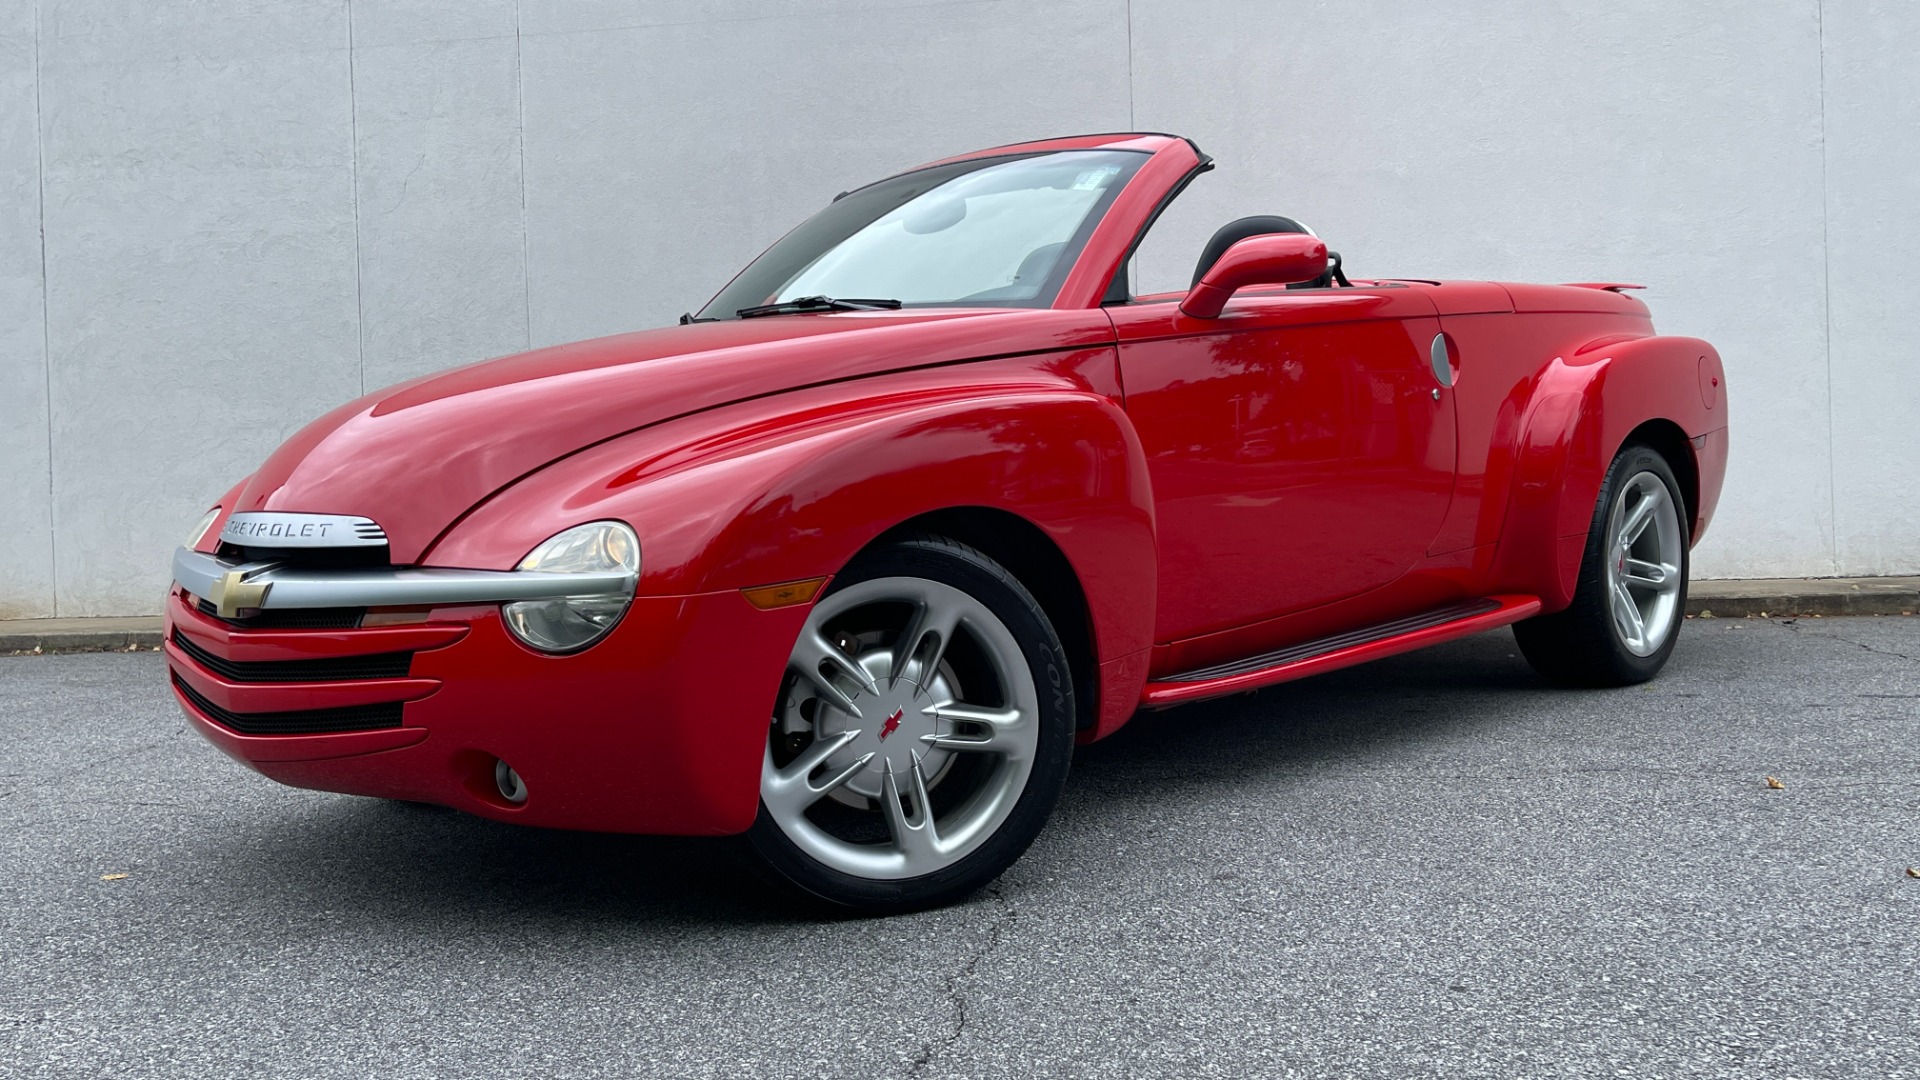 Used 2004 Chevrolet SSR LS / CONVERTIBLE / 5.3L V8 / LEATHER / HEATED SEATS / BACKUP CAMERA for sale Sold at Formula Imports in Charlotte NC 28227 28